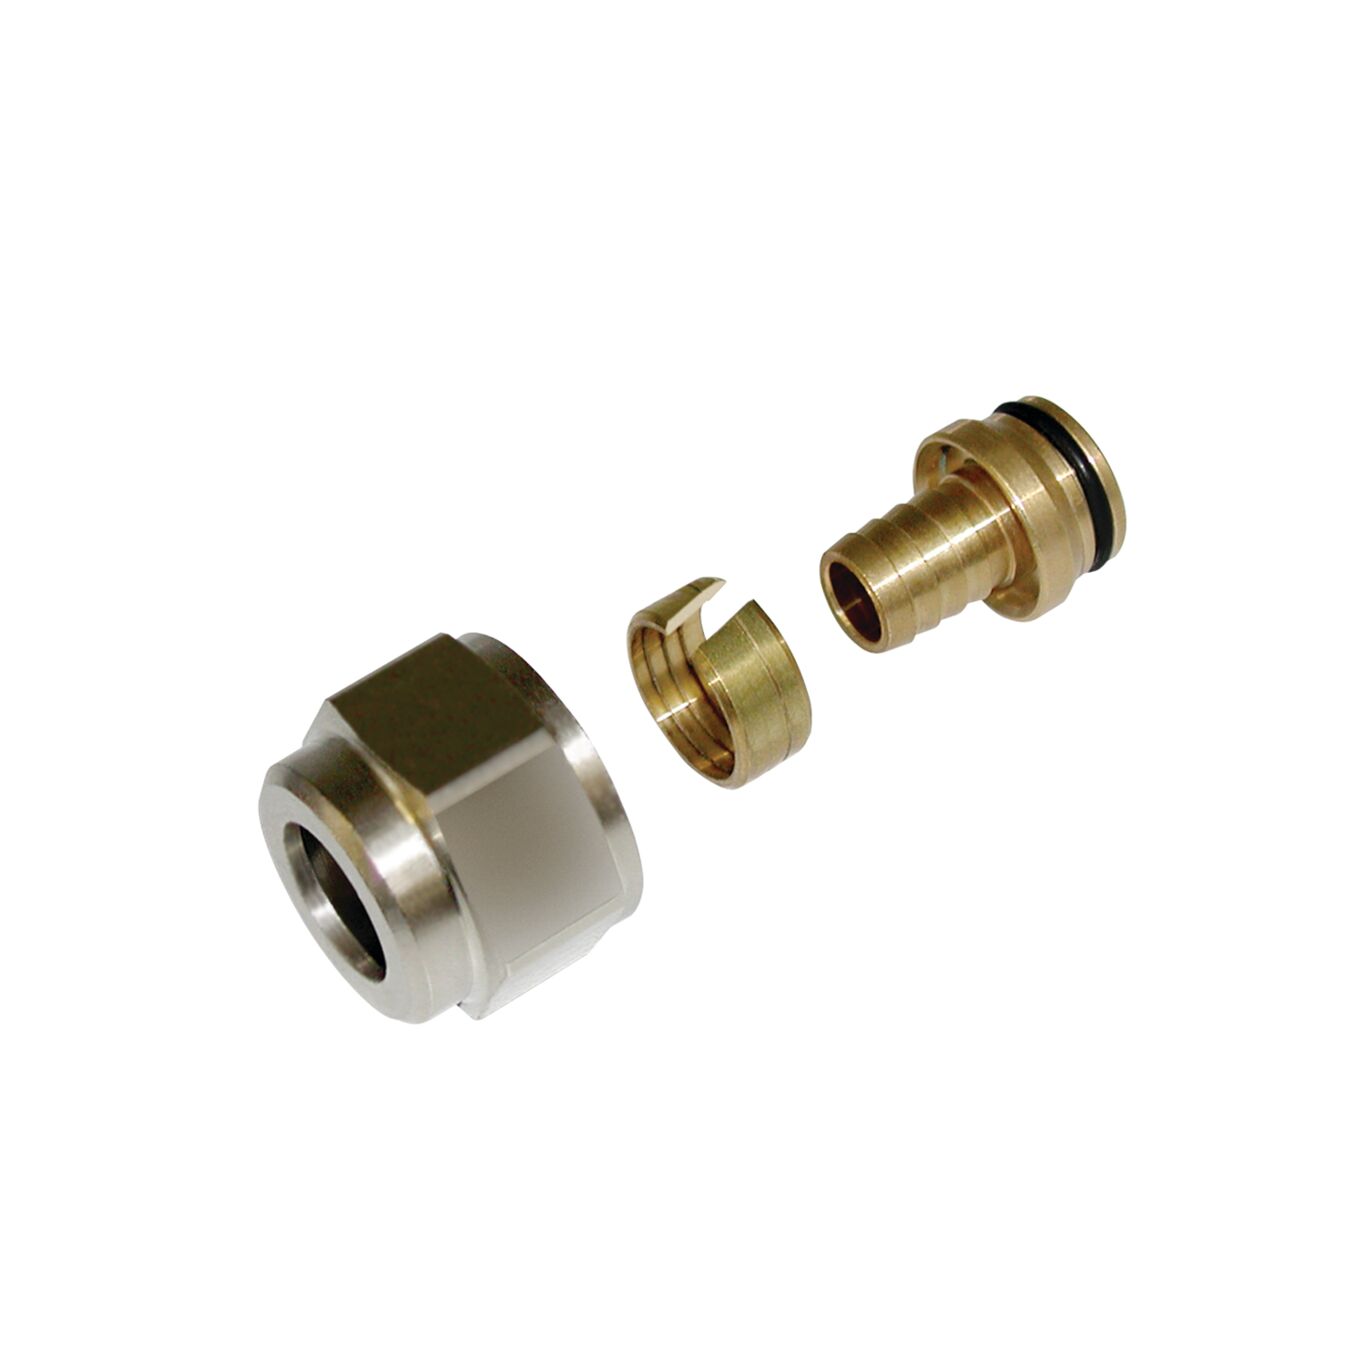 Product Image - SST20 Compression Fittings